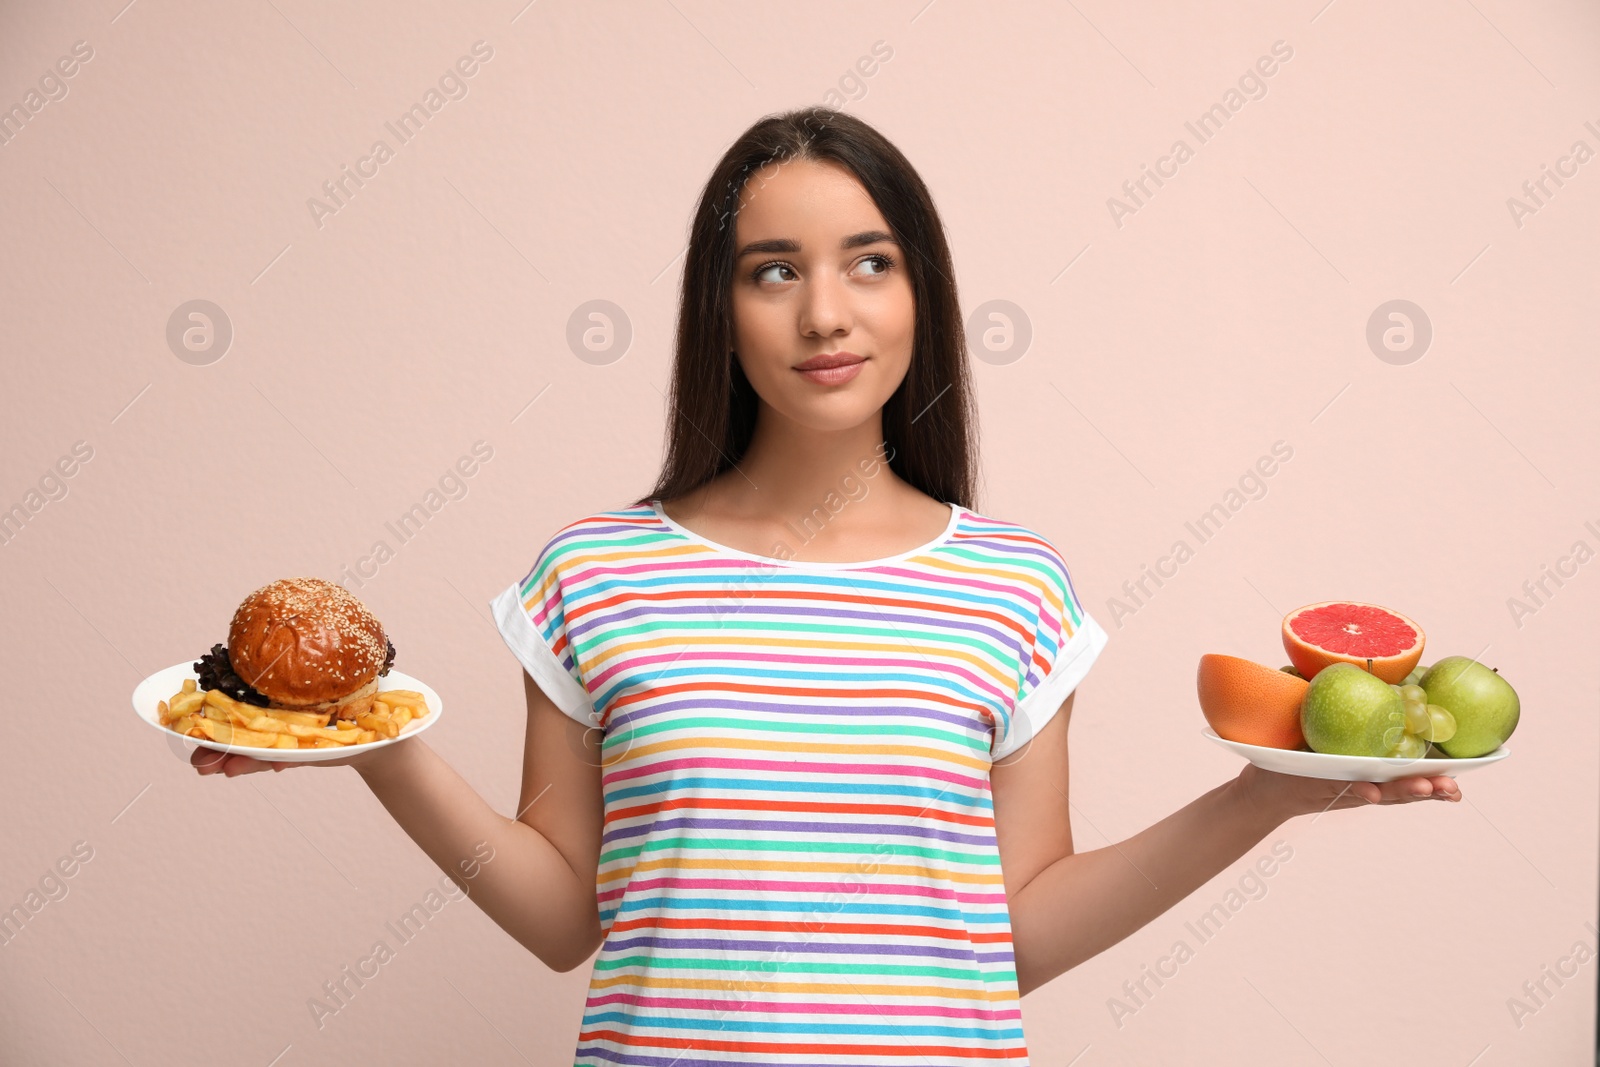 Photo of Woman choosing between fruits and burger with French fries on beige background